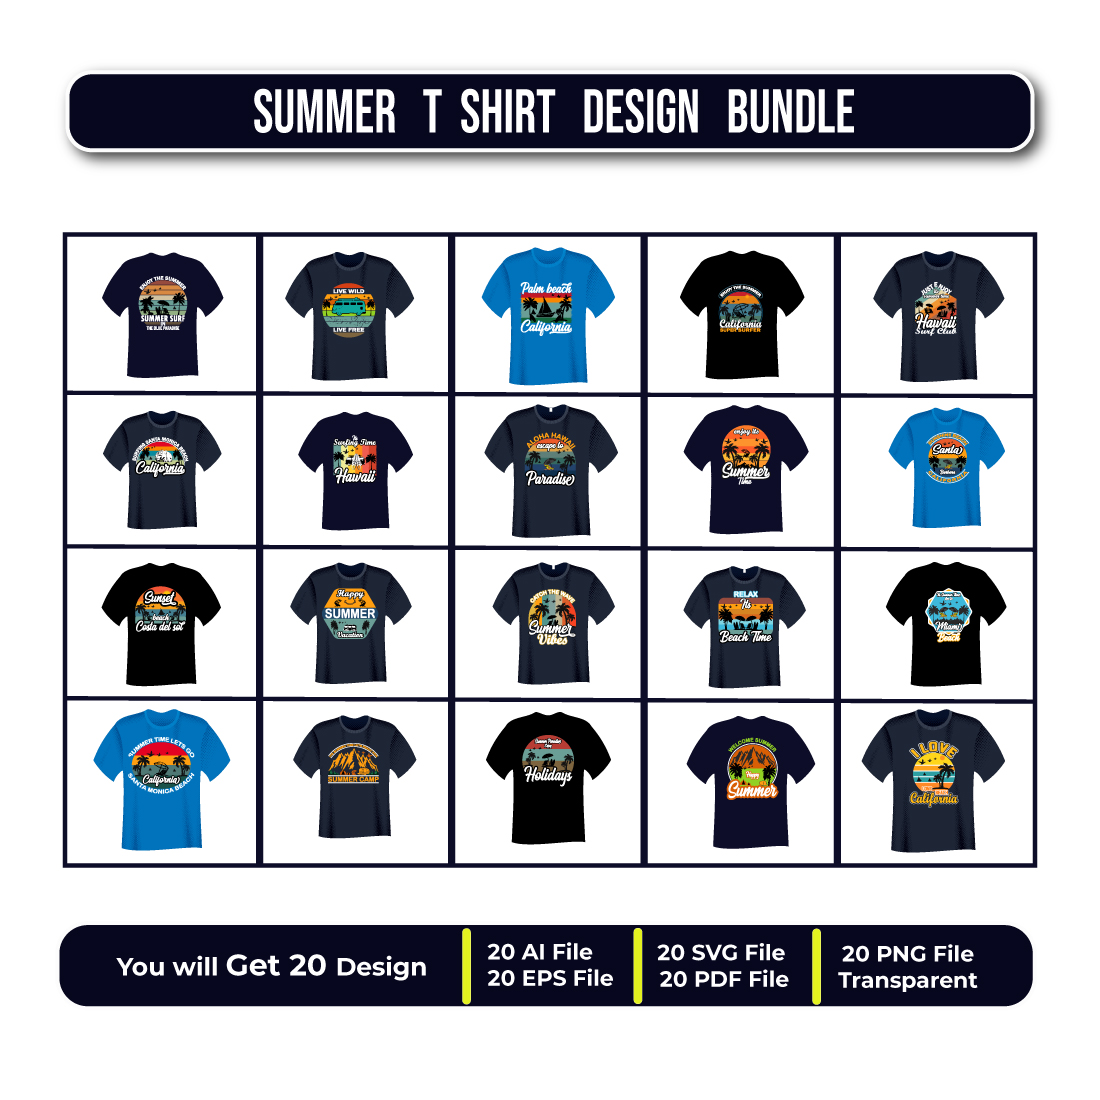 20 Summer T Shirt Design for $9 Only cover image.